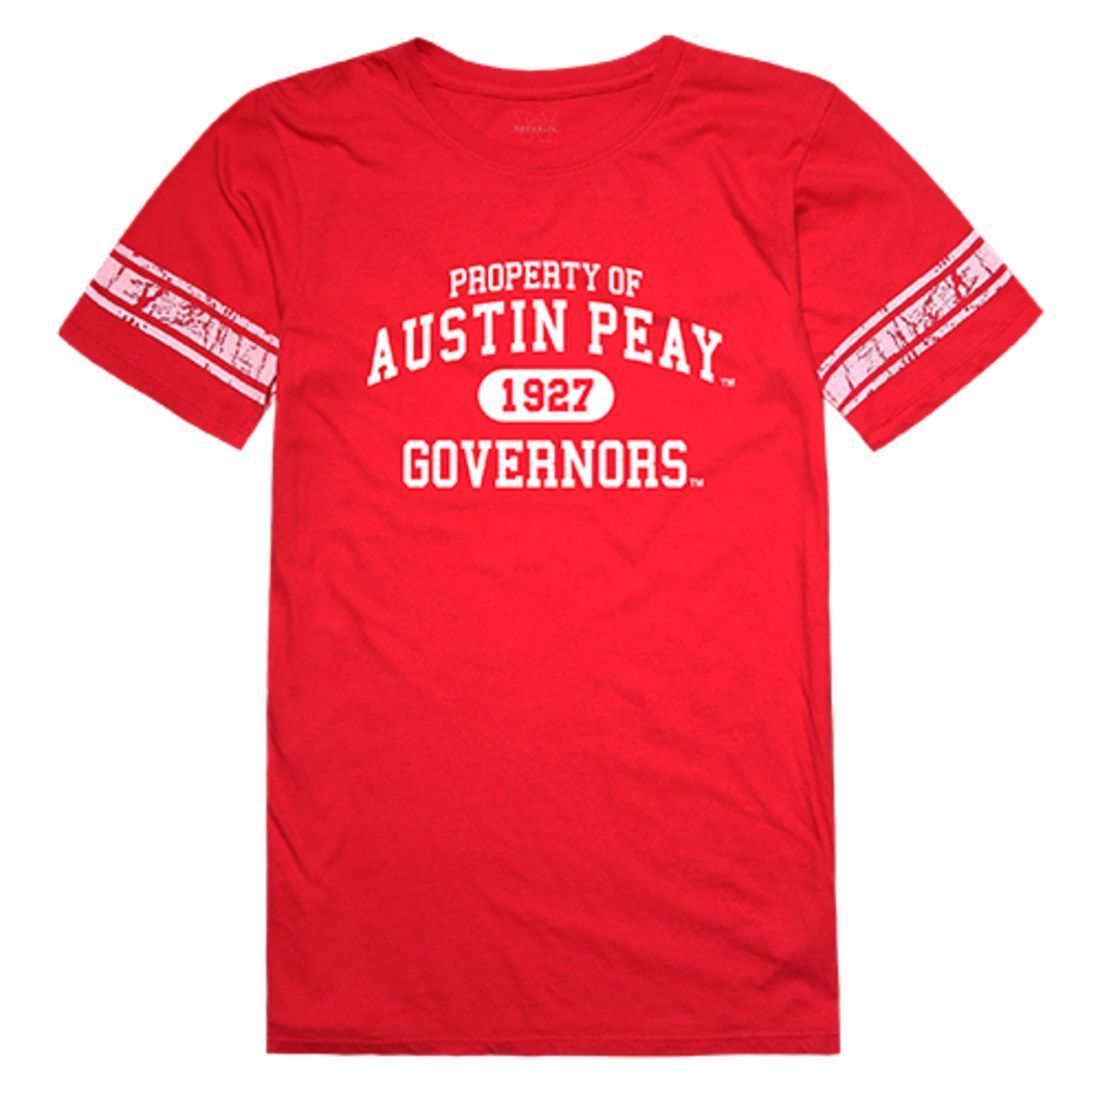 APSU Austin Peay State University Governors Womens Property Tee T-Shirt Red-Campus-Wardrobe